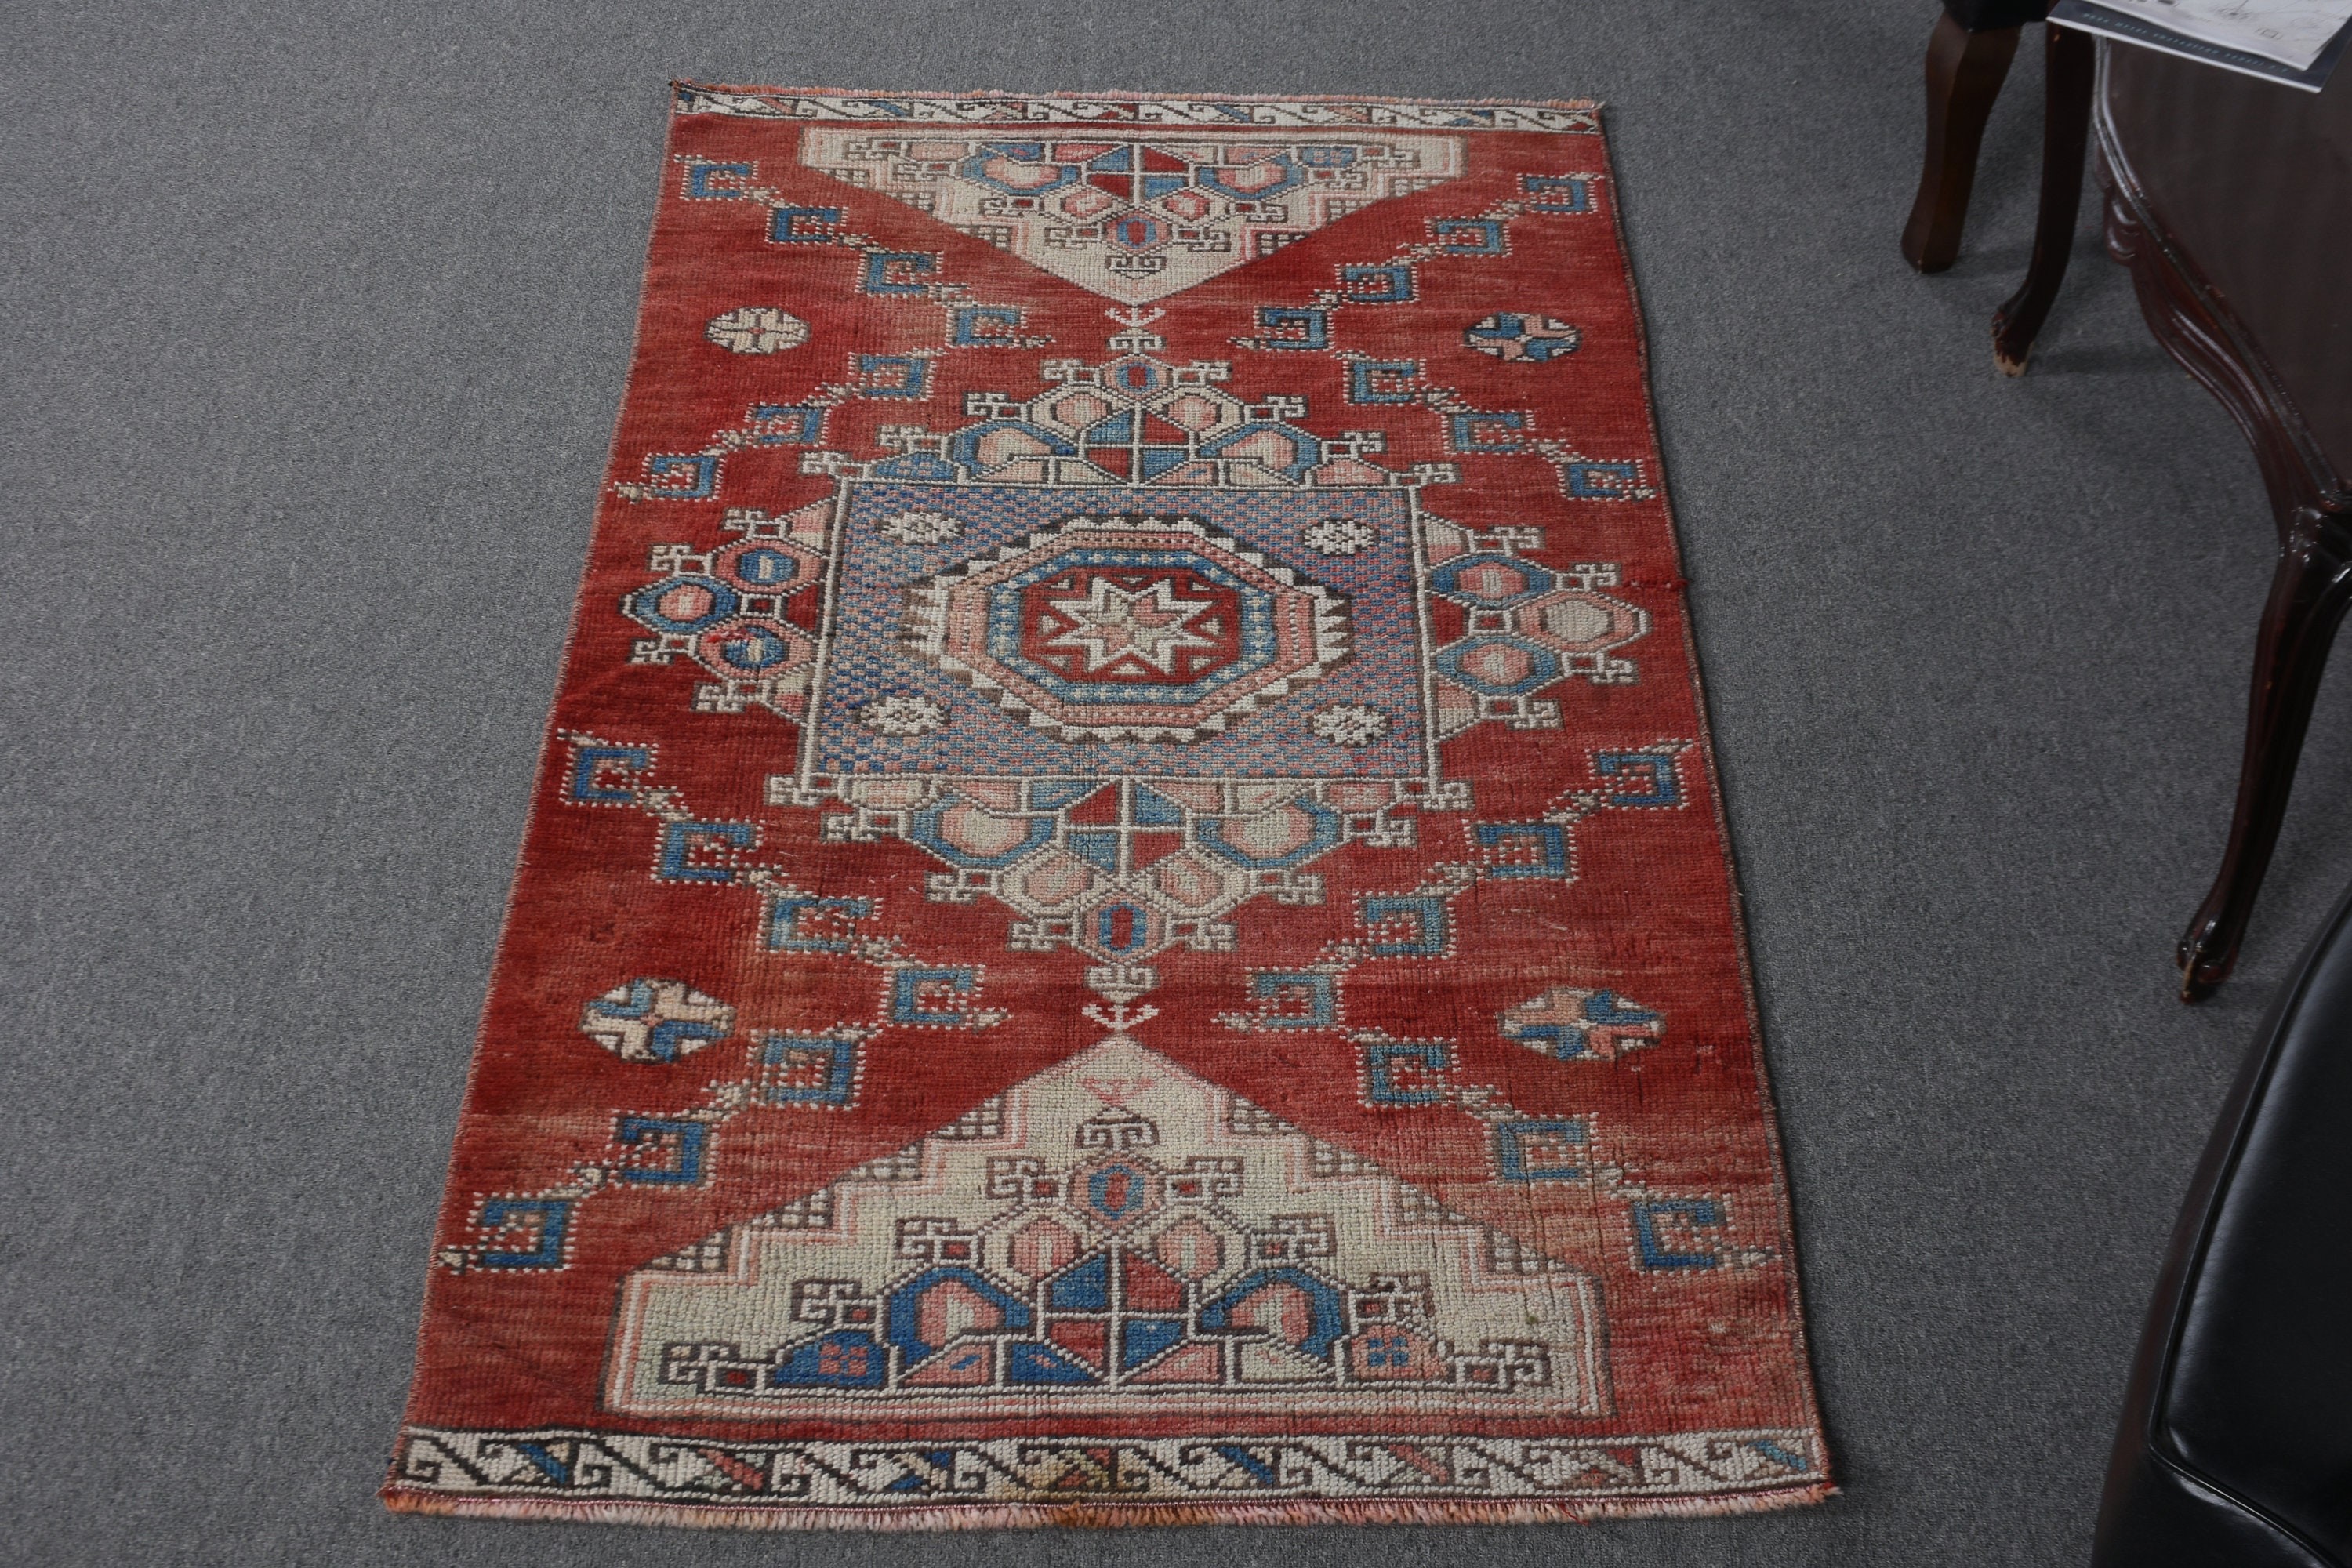 Entry Rug, Vintage Rugs, Anatolian Rug, Red Oriental Rugs, Bright Rug, Kitchen Rug, Rugs for Bedroom, Turkish Rugs, 3x5.7 ft Accent Rug